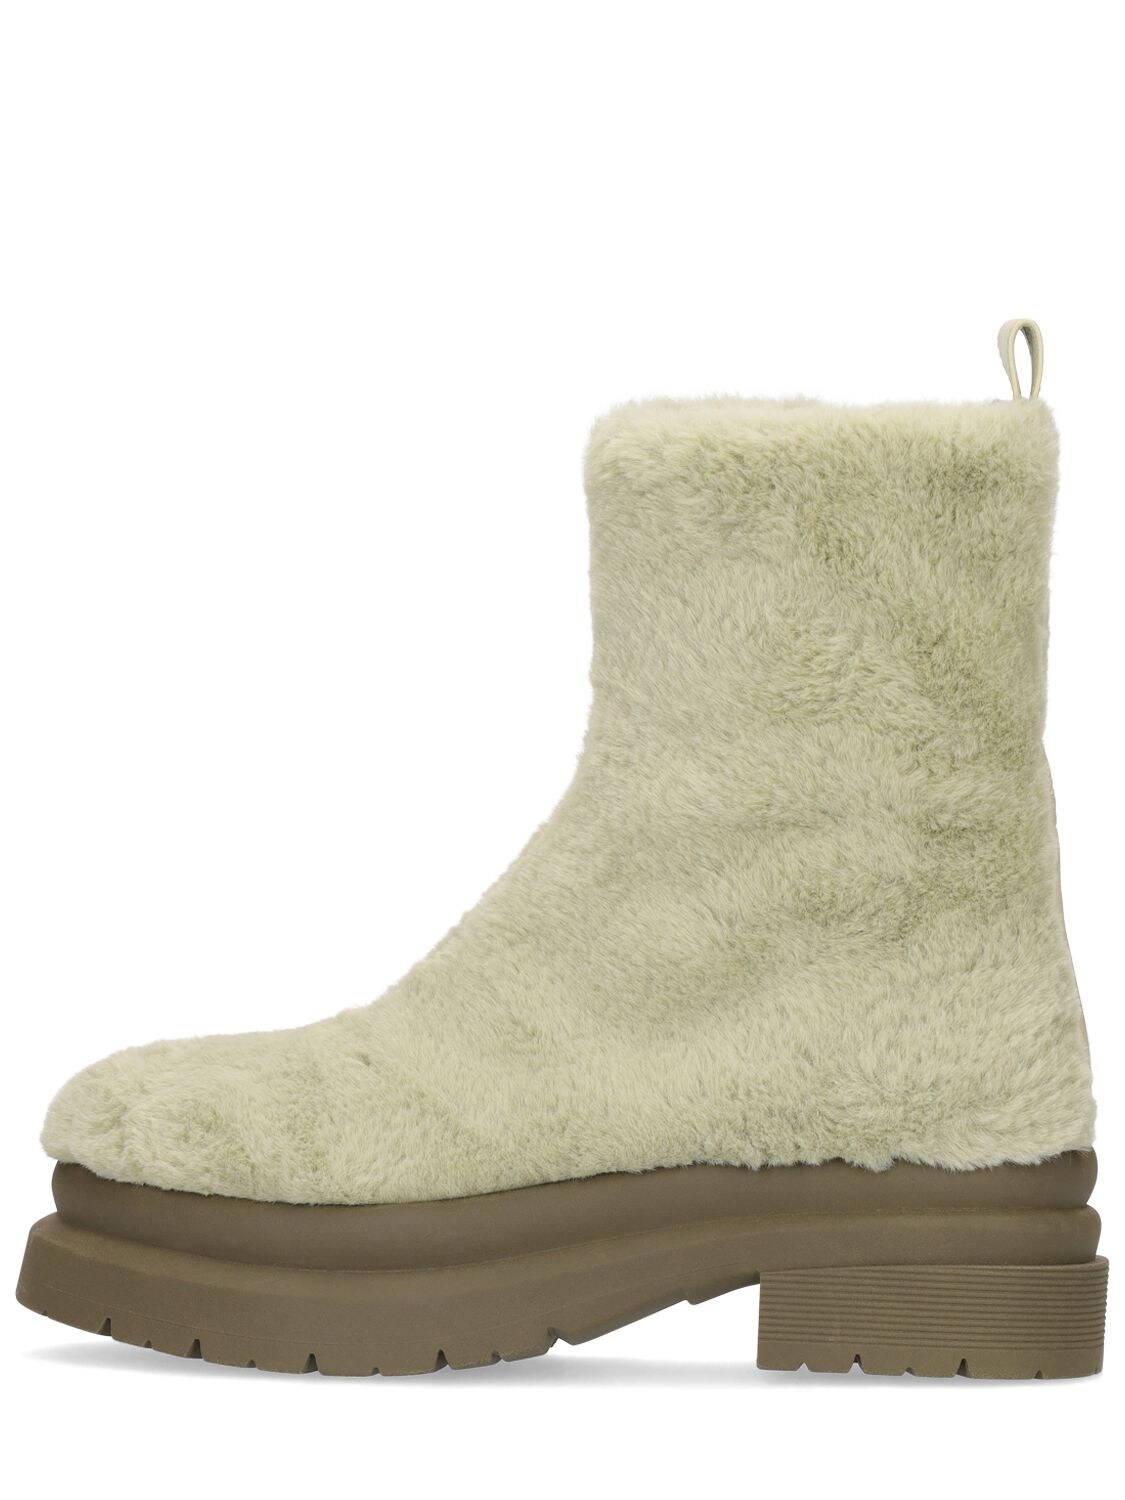 JW ANDERSON 20mm Eco Fur Ankle Boots